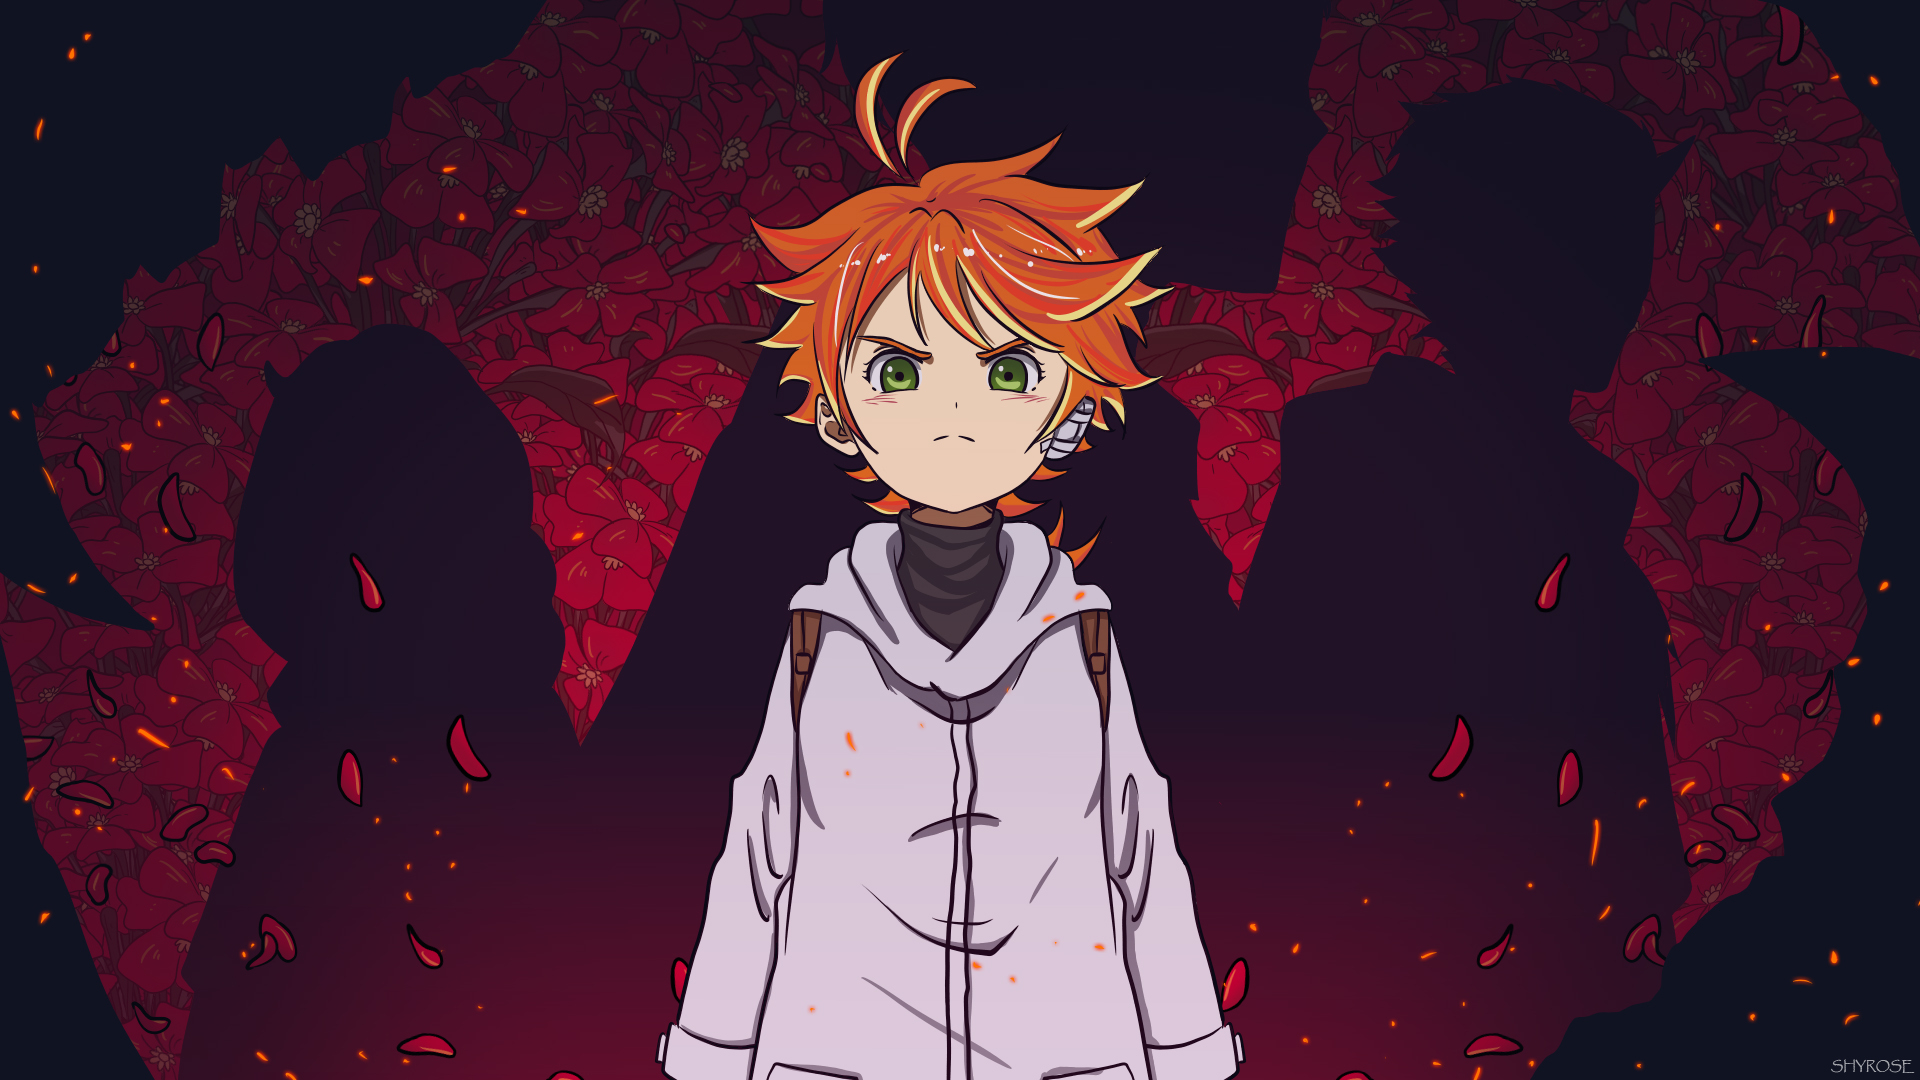 2932x2932201976 The Promised Neverland Hd 2932x2932201976 Resolution Wallpaper Hd Anime 4k 